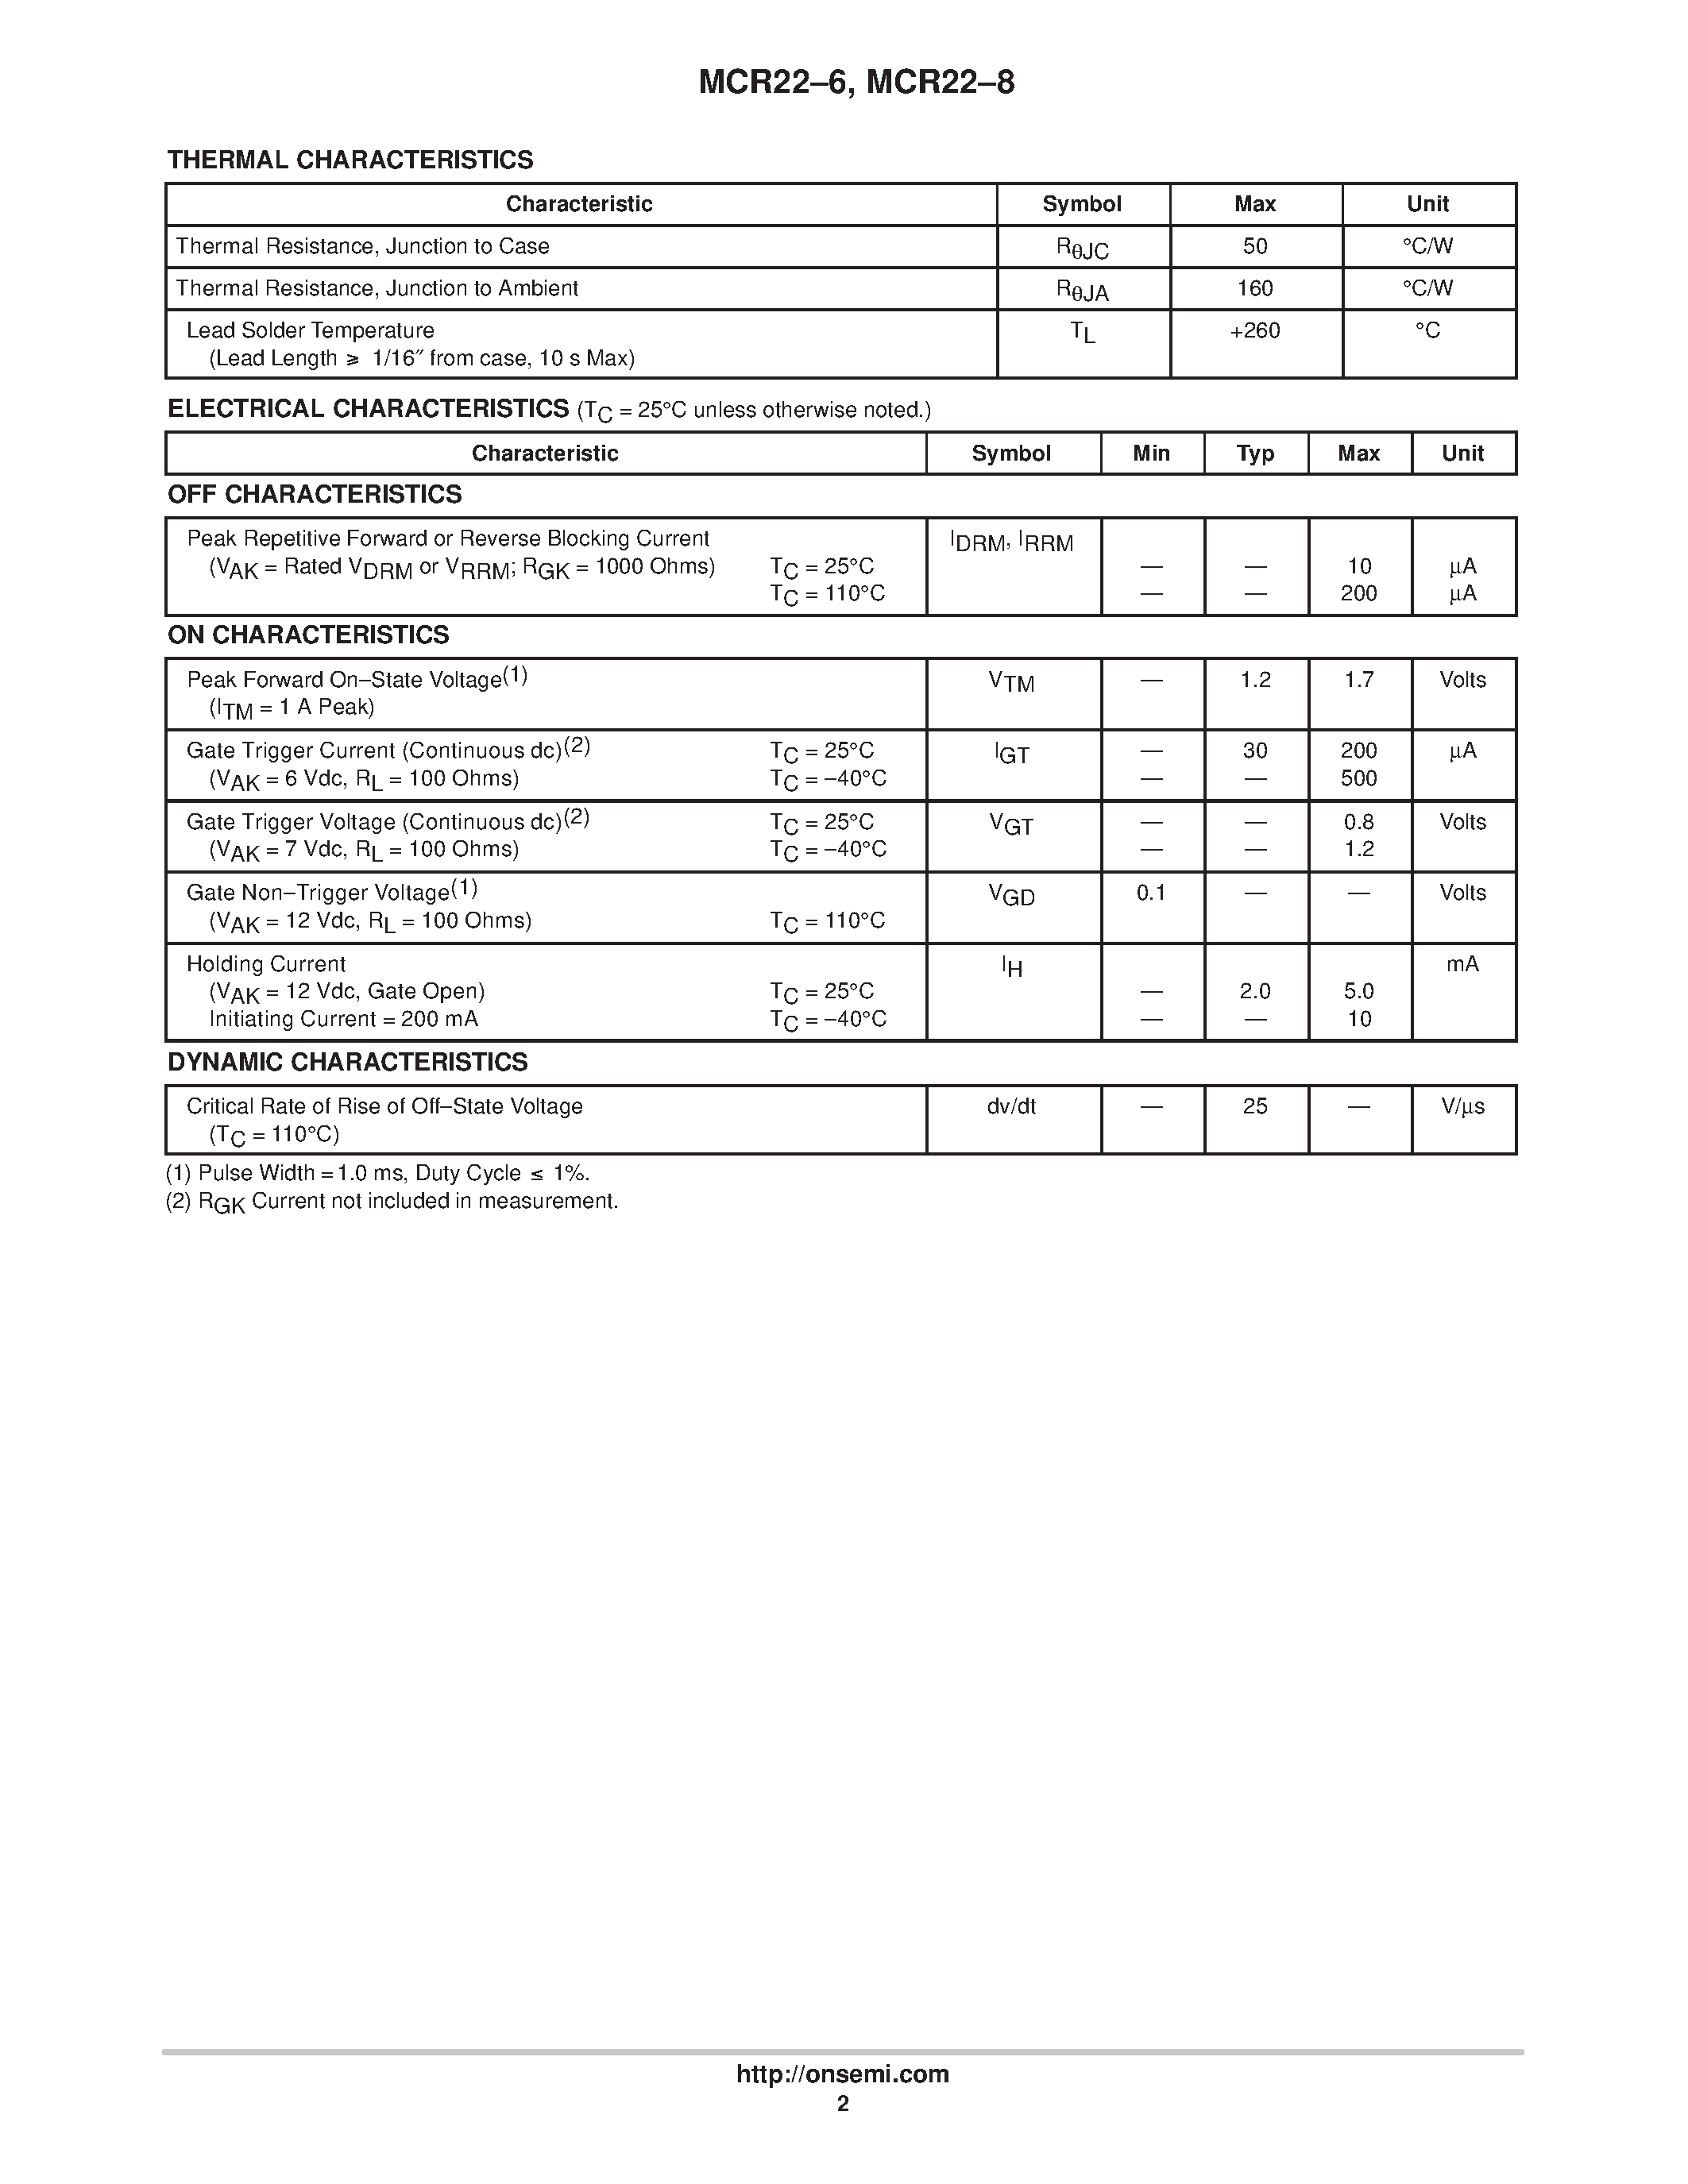 Datasheet MCR22-6 - (MCR22-6 / -8) SENSITIVE GATE SILICON CONTROLLED RECTIFIERS page 2